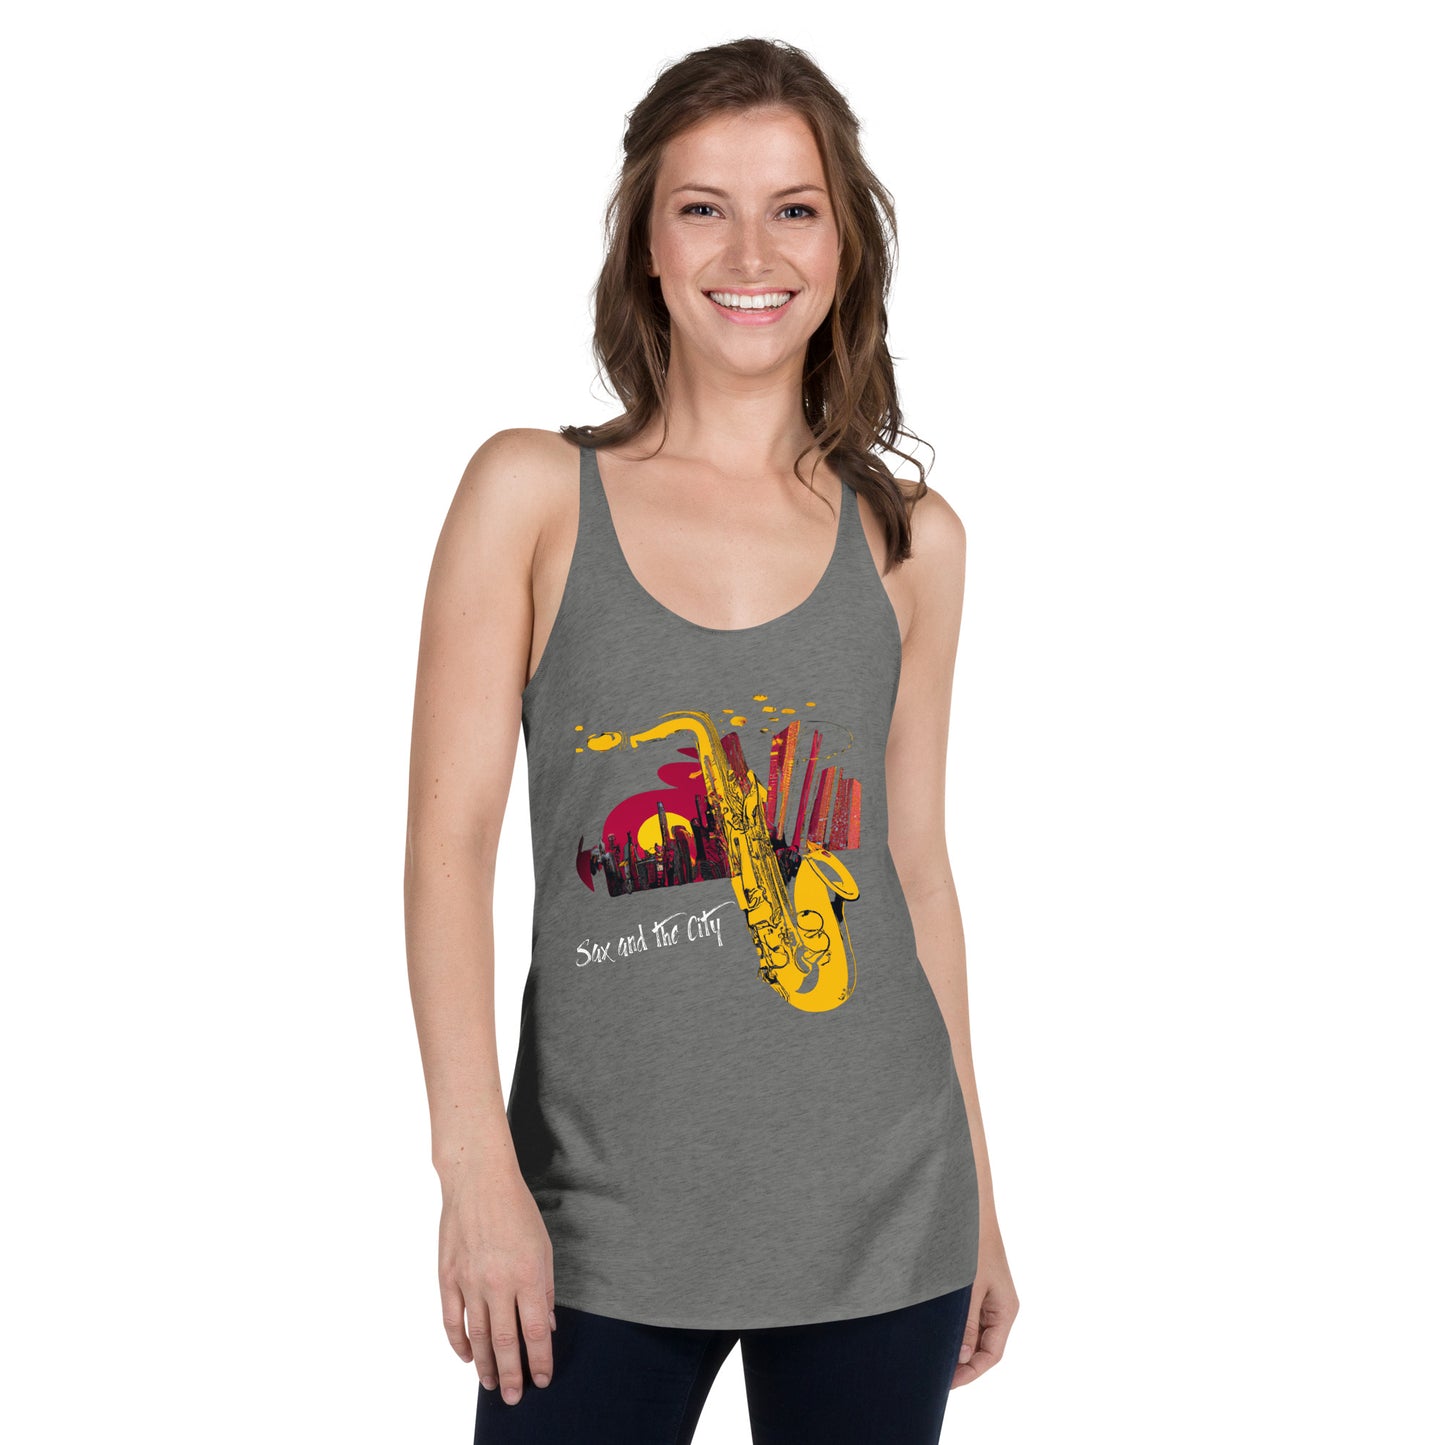 Sax and The City Women's Racerback Tank